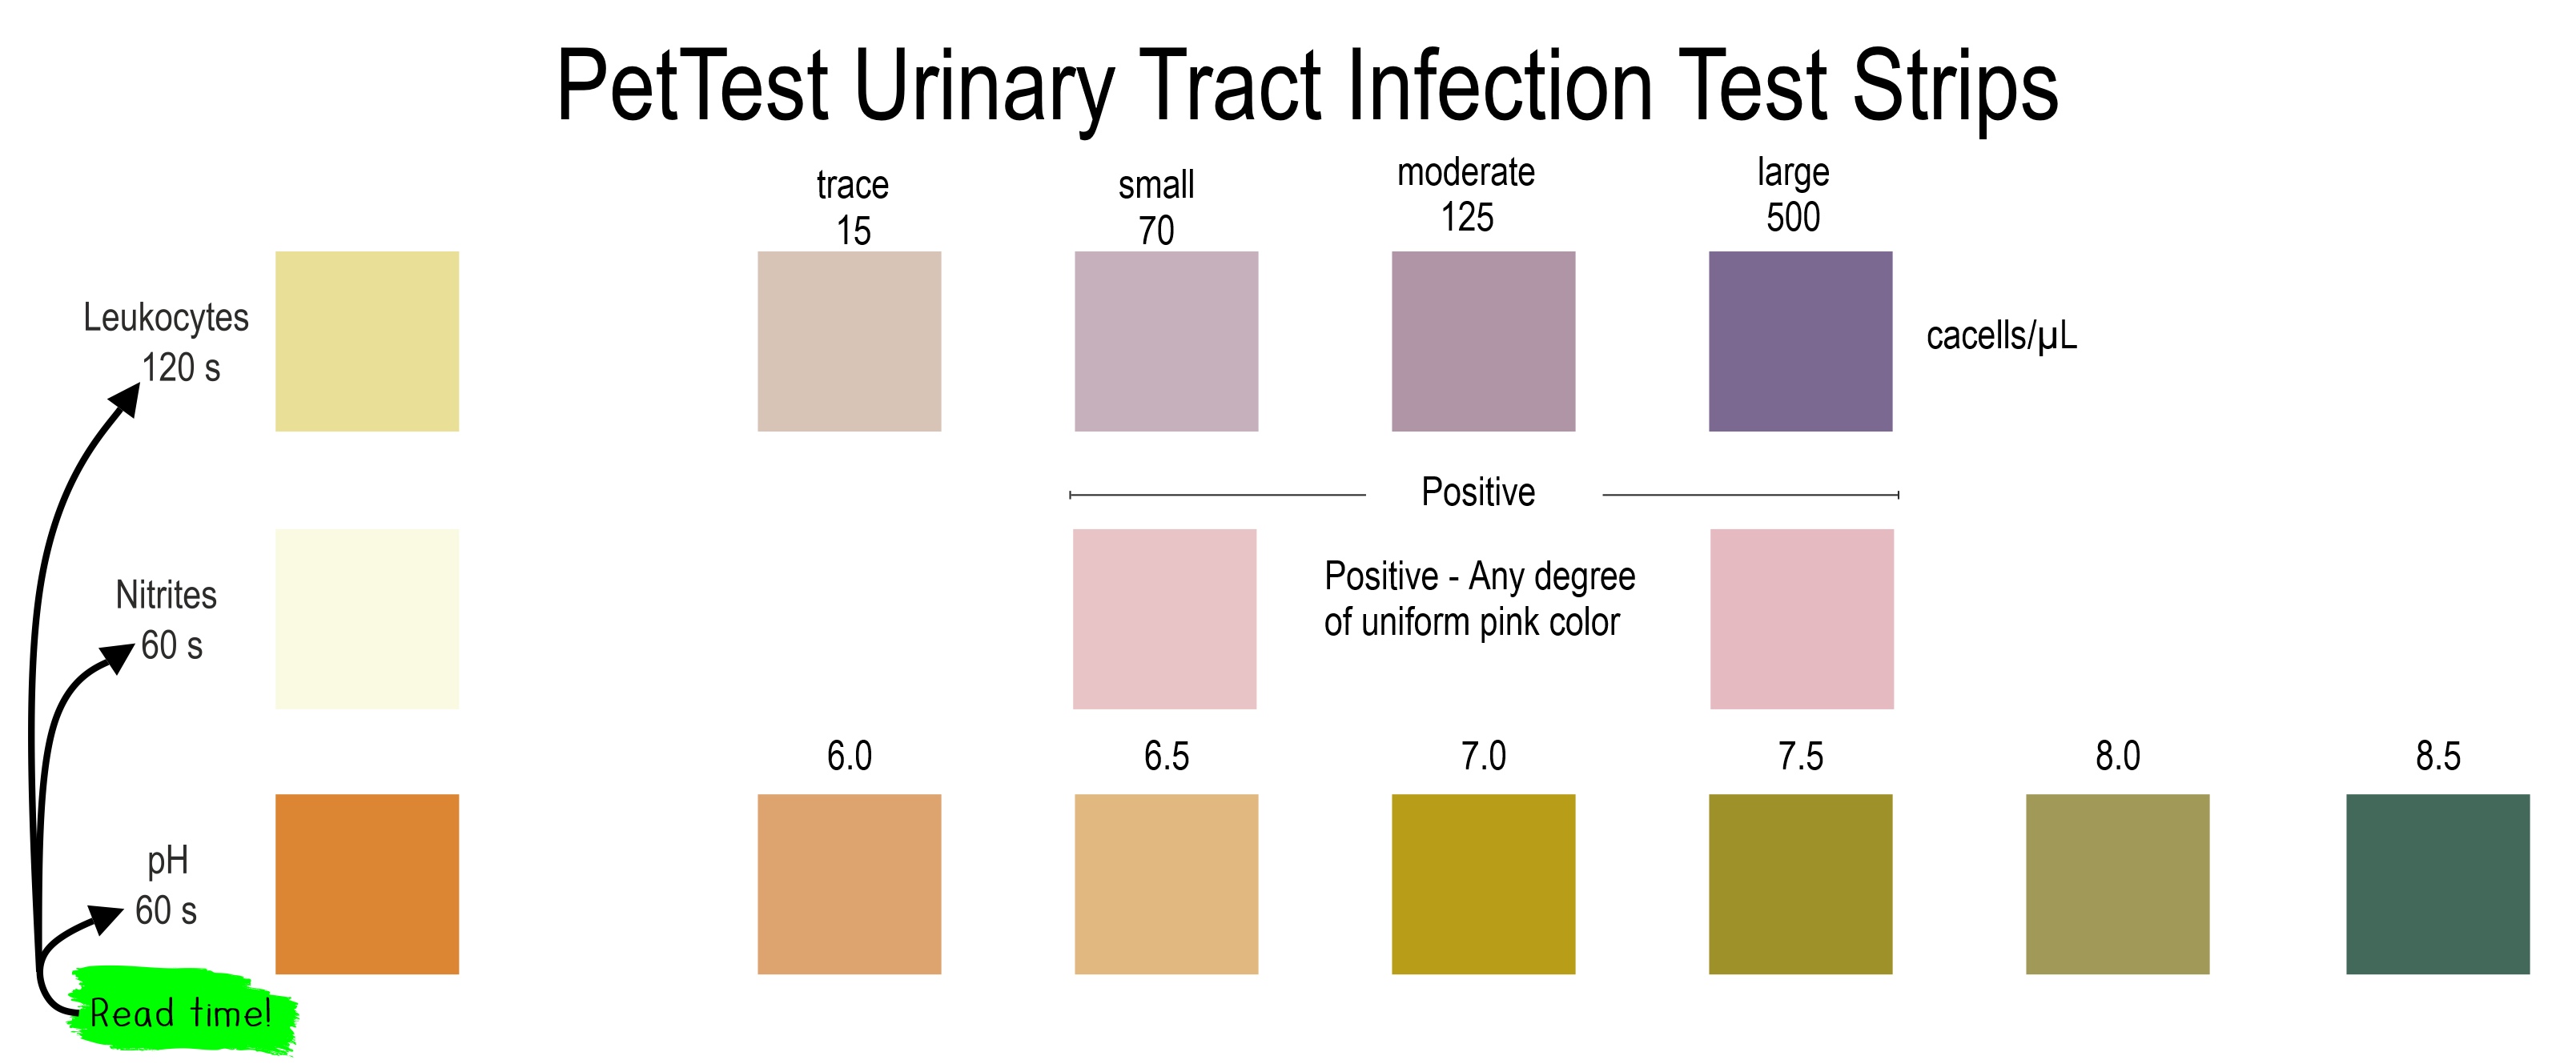 PetTest Urinary Tract Infection Test Strips When to Read for blog mtm